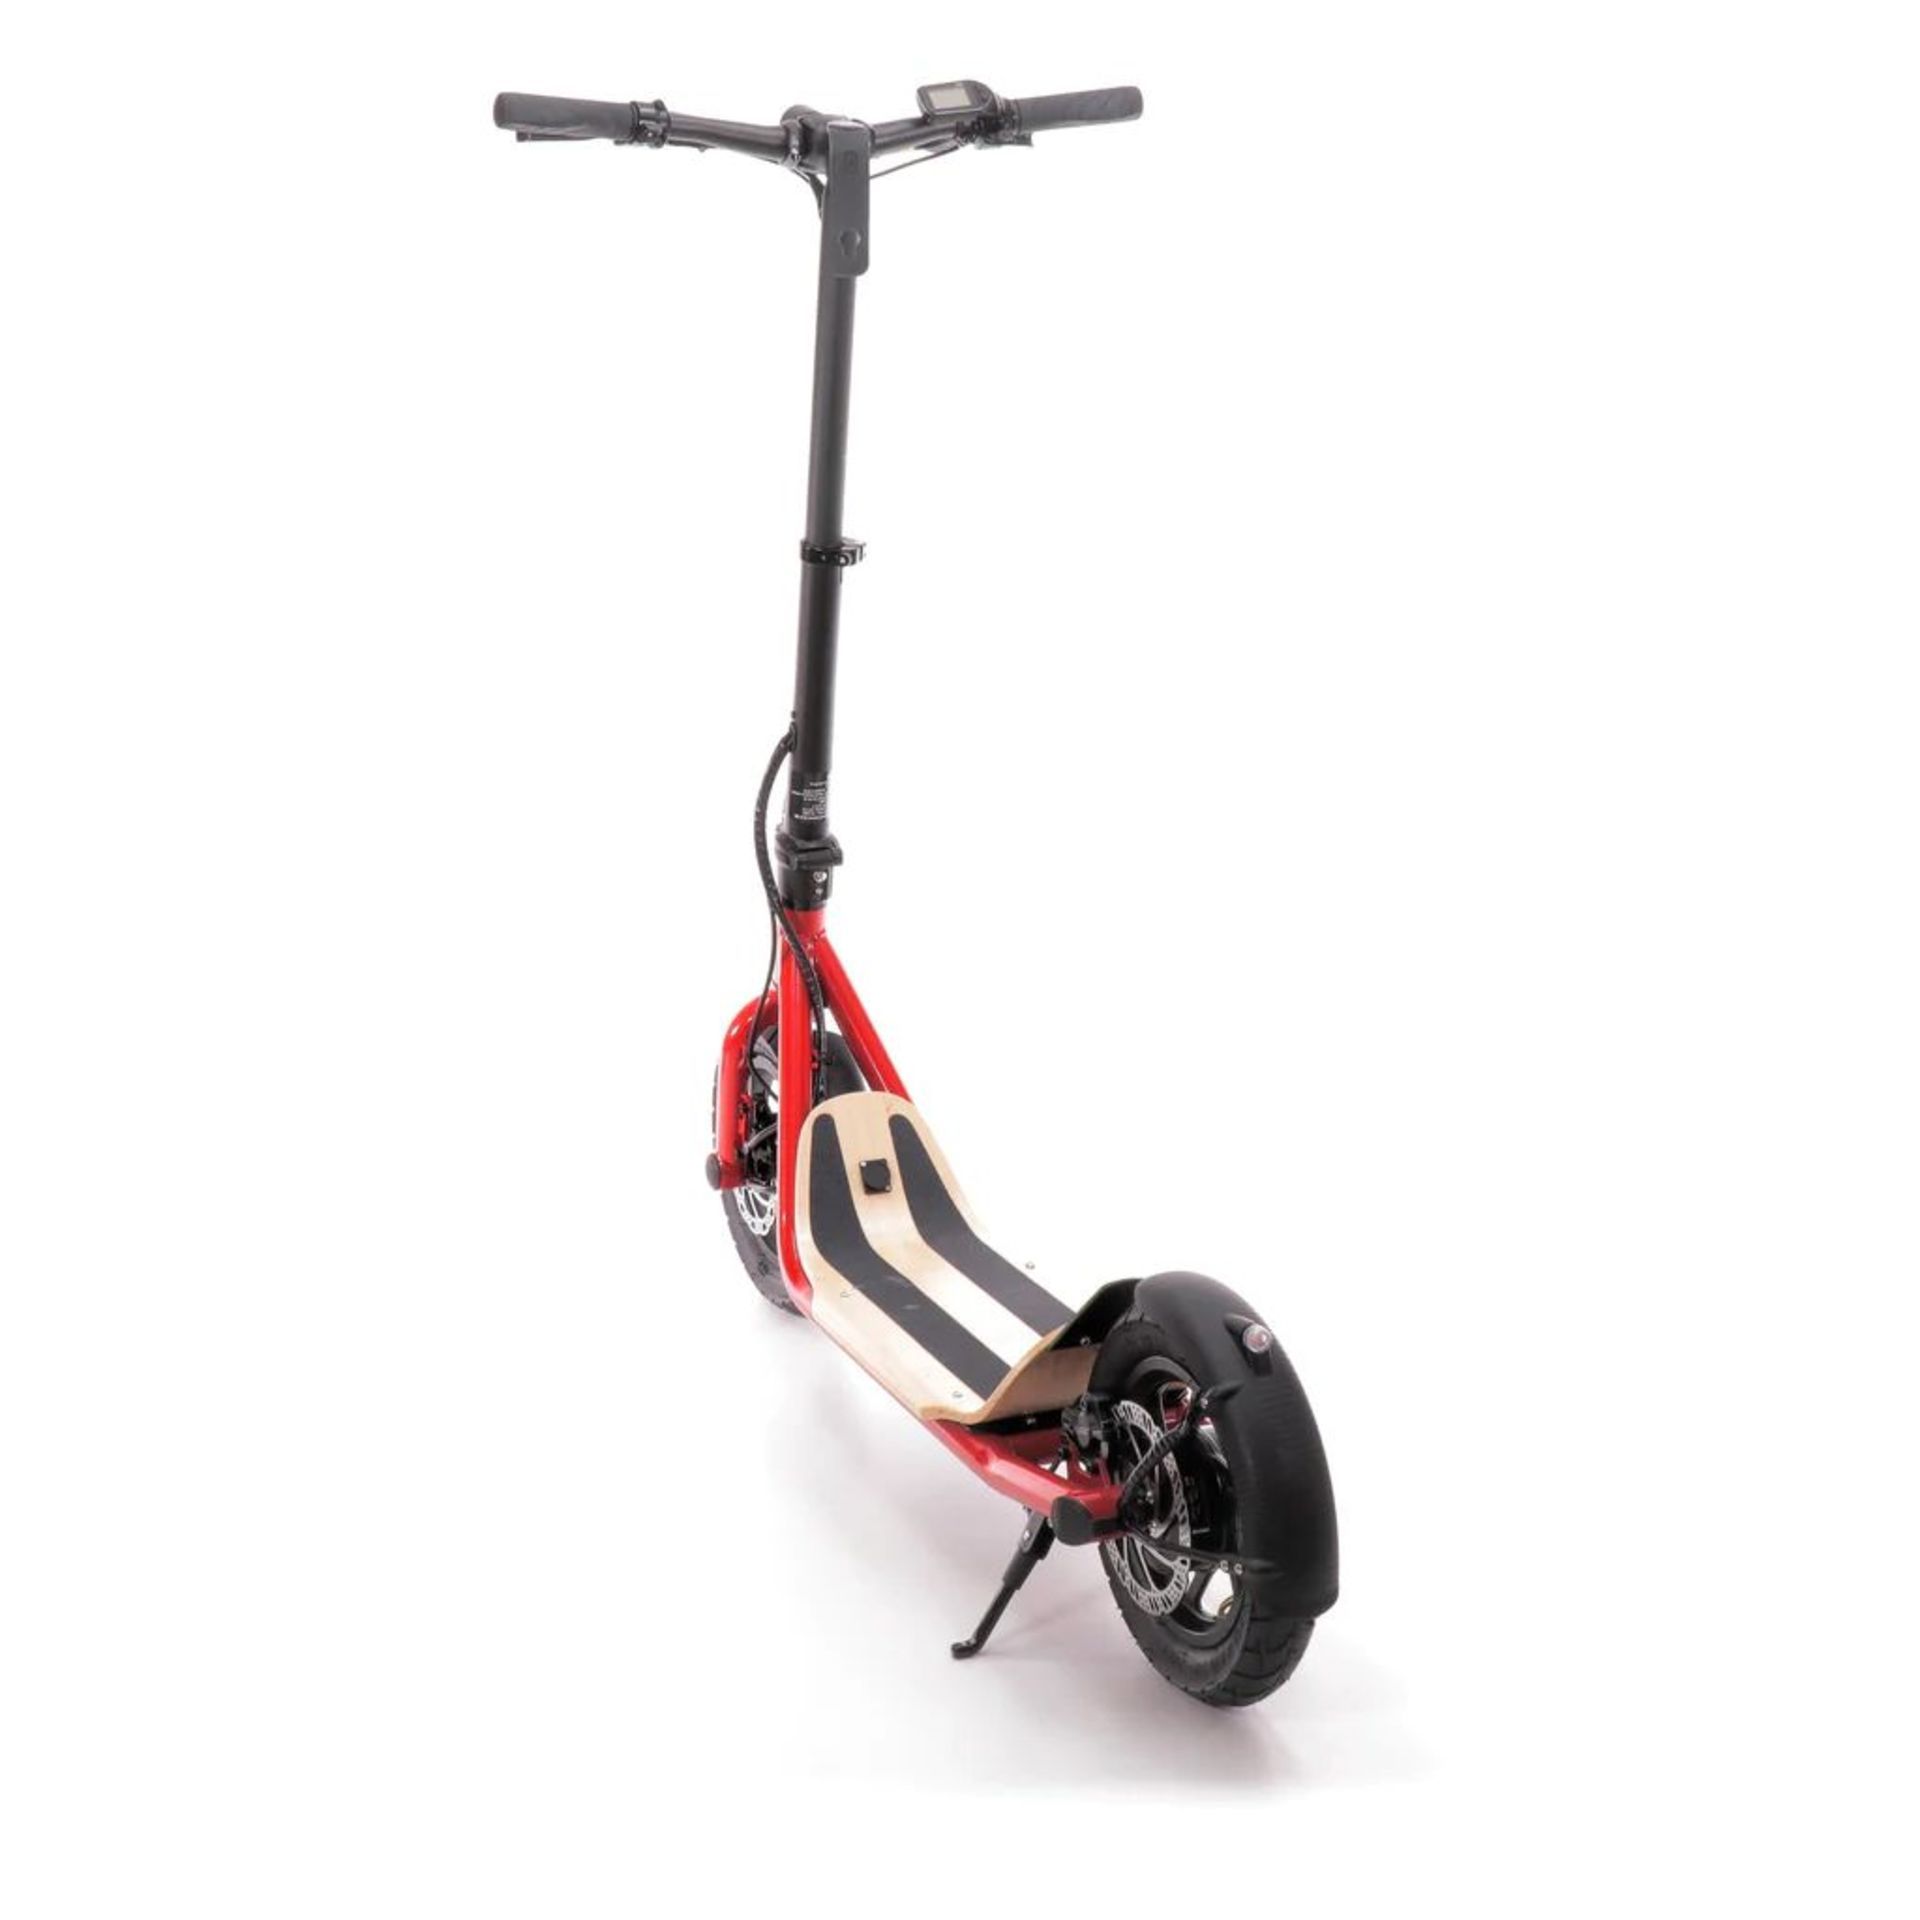 BRAND NEW 8TEV B12 PROXI CLASSIC ELECTRIC SCOOTER RED RRP £1299, Perfect city commuter vehicle - Image 2 of 2